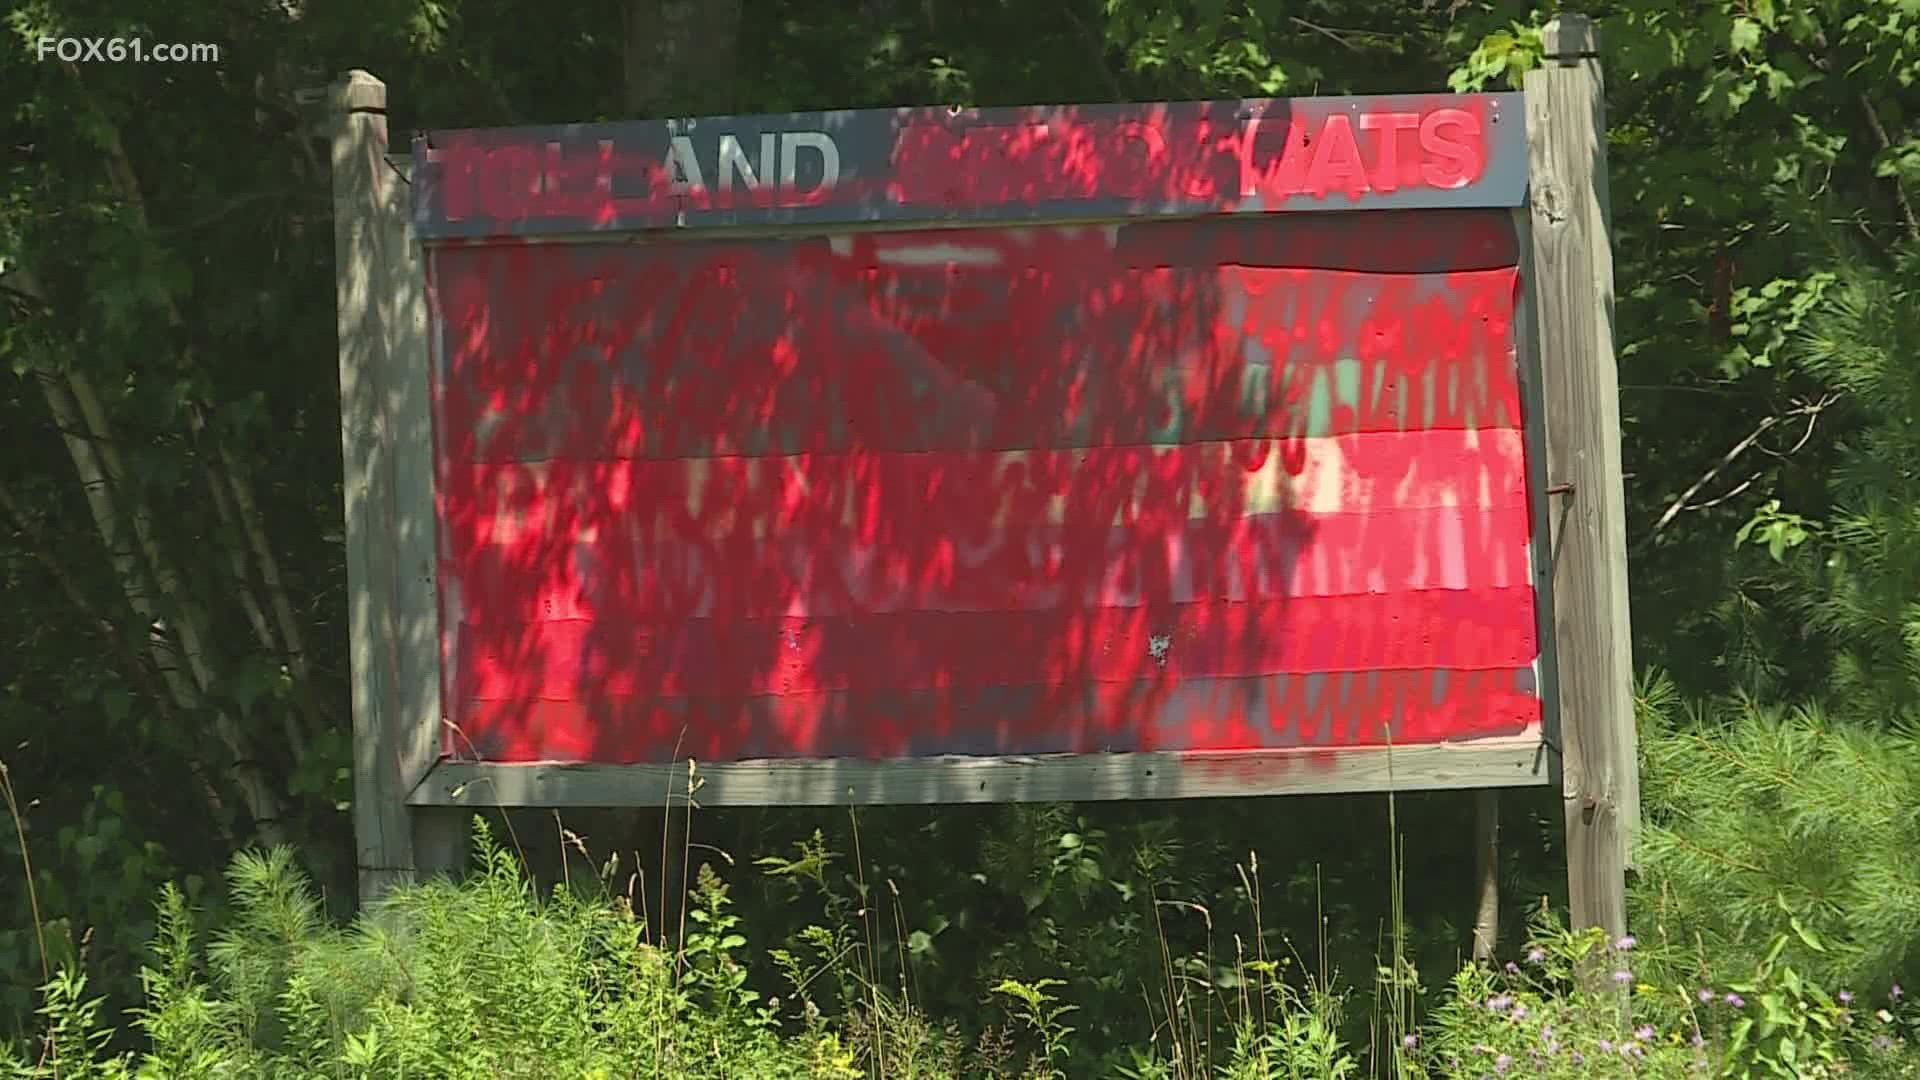 The sign showed support for the LGBTQ community and tow officials are looking for the suspects.